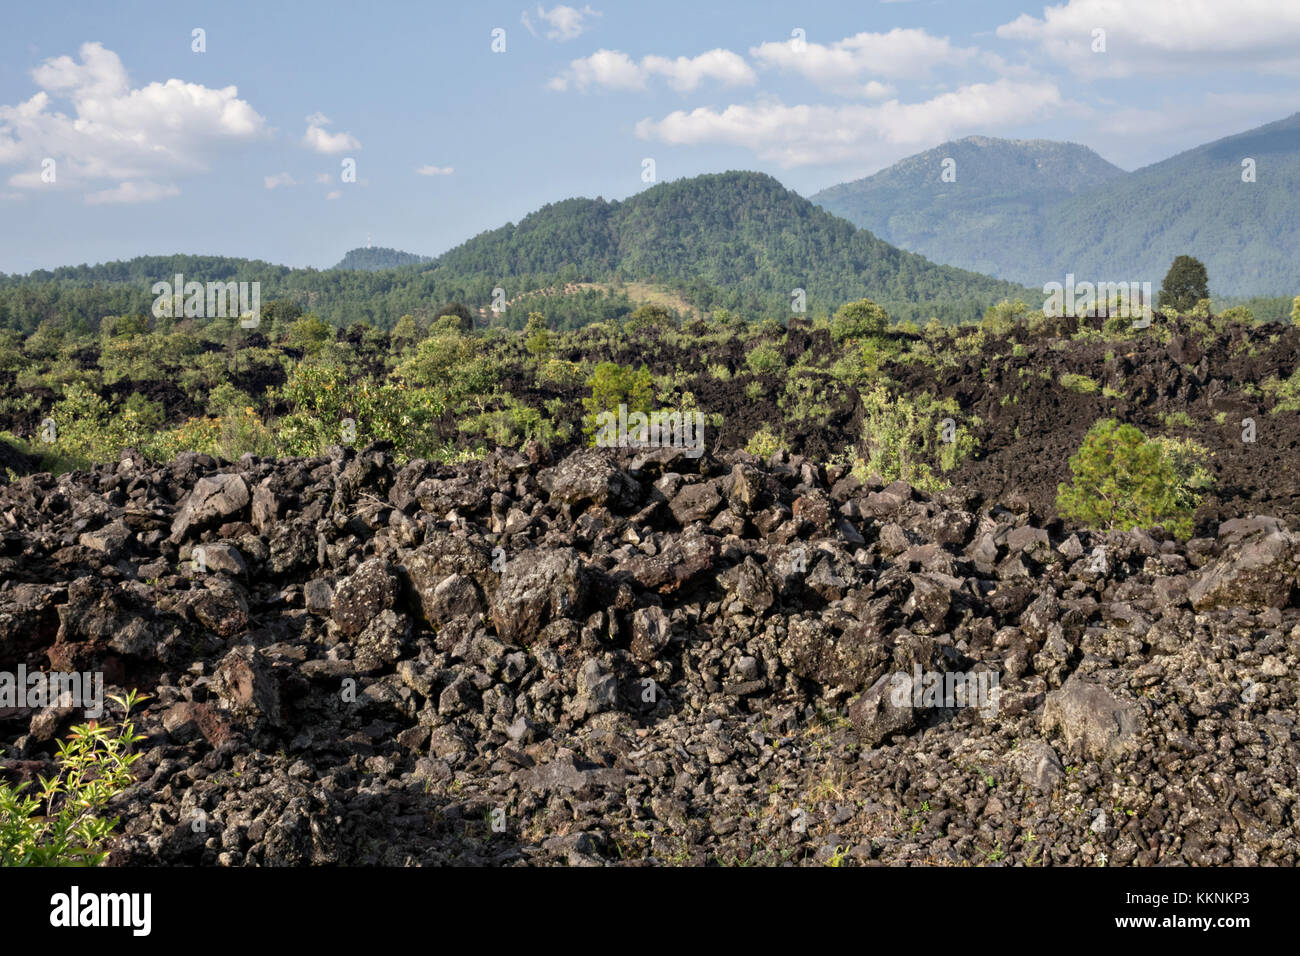 A sea of dried lava rock in the remote village of San Juan Parangaricutiro, Michoacan, Mexico. This area was covered in an eight-year eruption of the Paricutin volcano which consumed two villages in 1943 and covered the region in lava and ash. Stock Photo